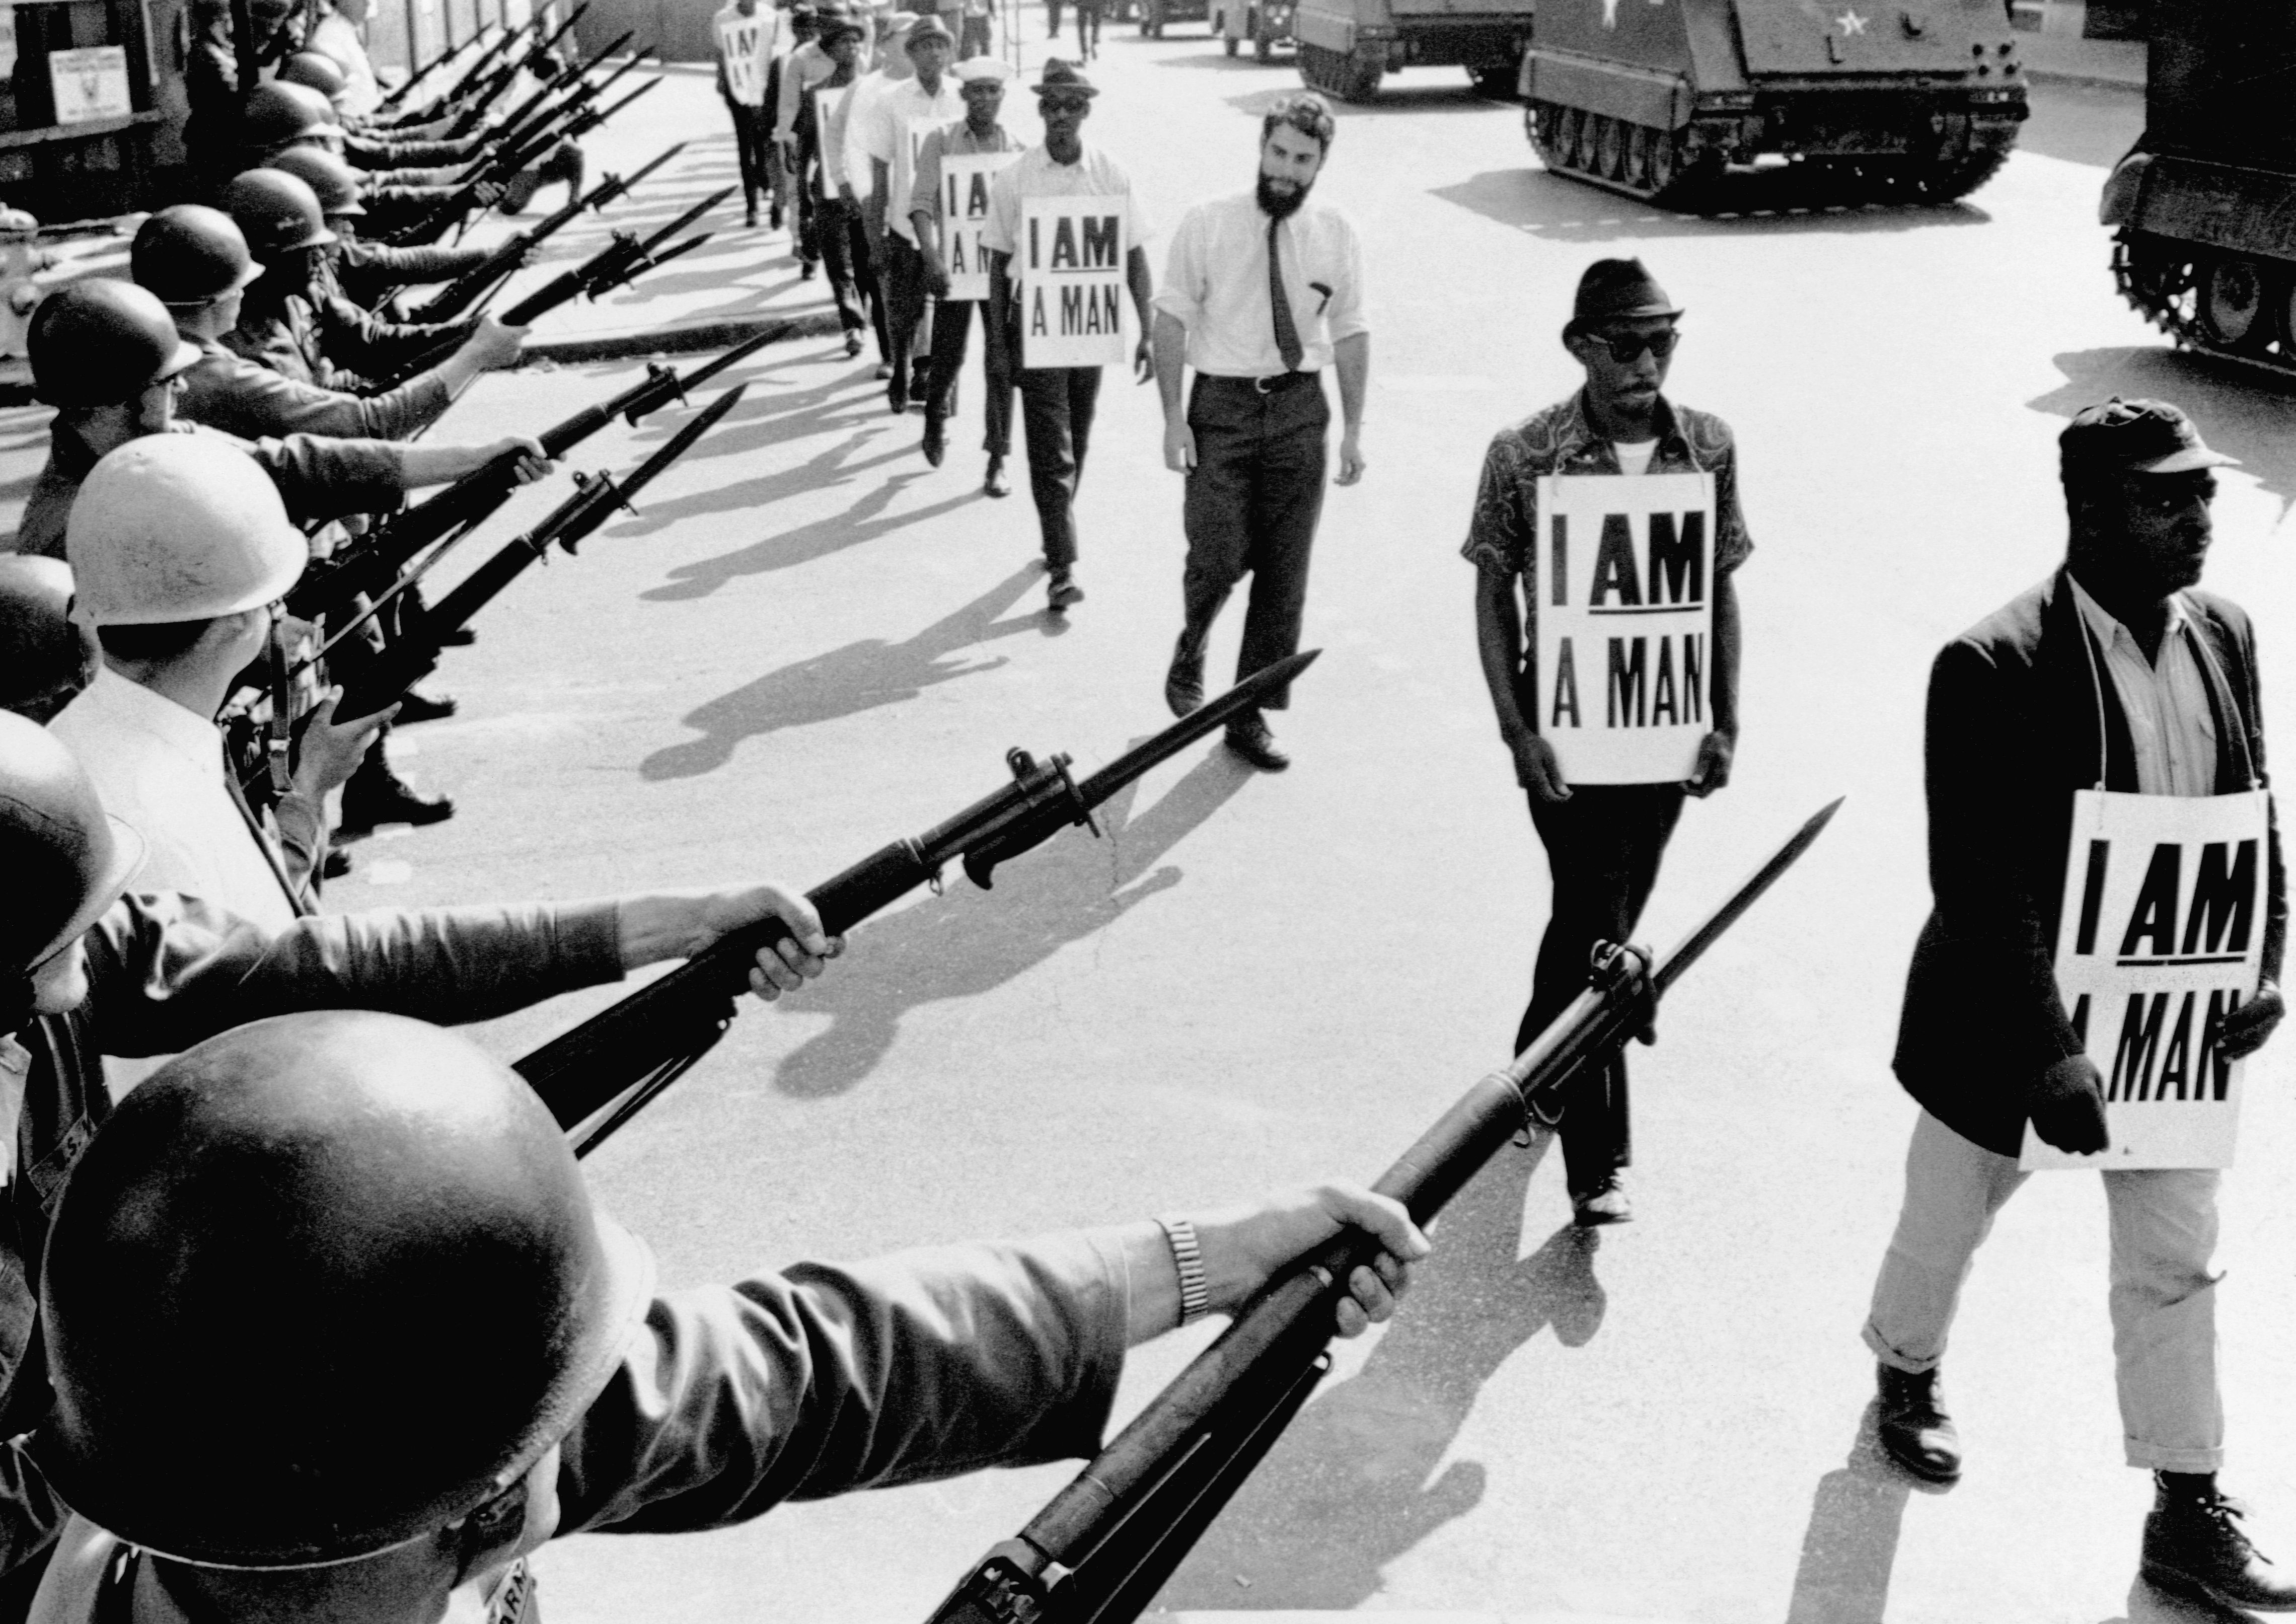 Civil Rights activists blocked by National Guardsmen with bayonets. The marching demonstrators, who are wearing signs which say "I Am A Man,"